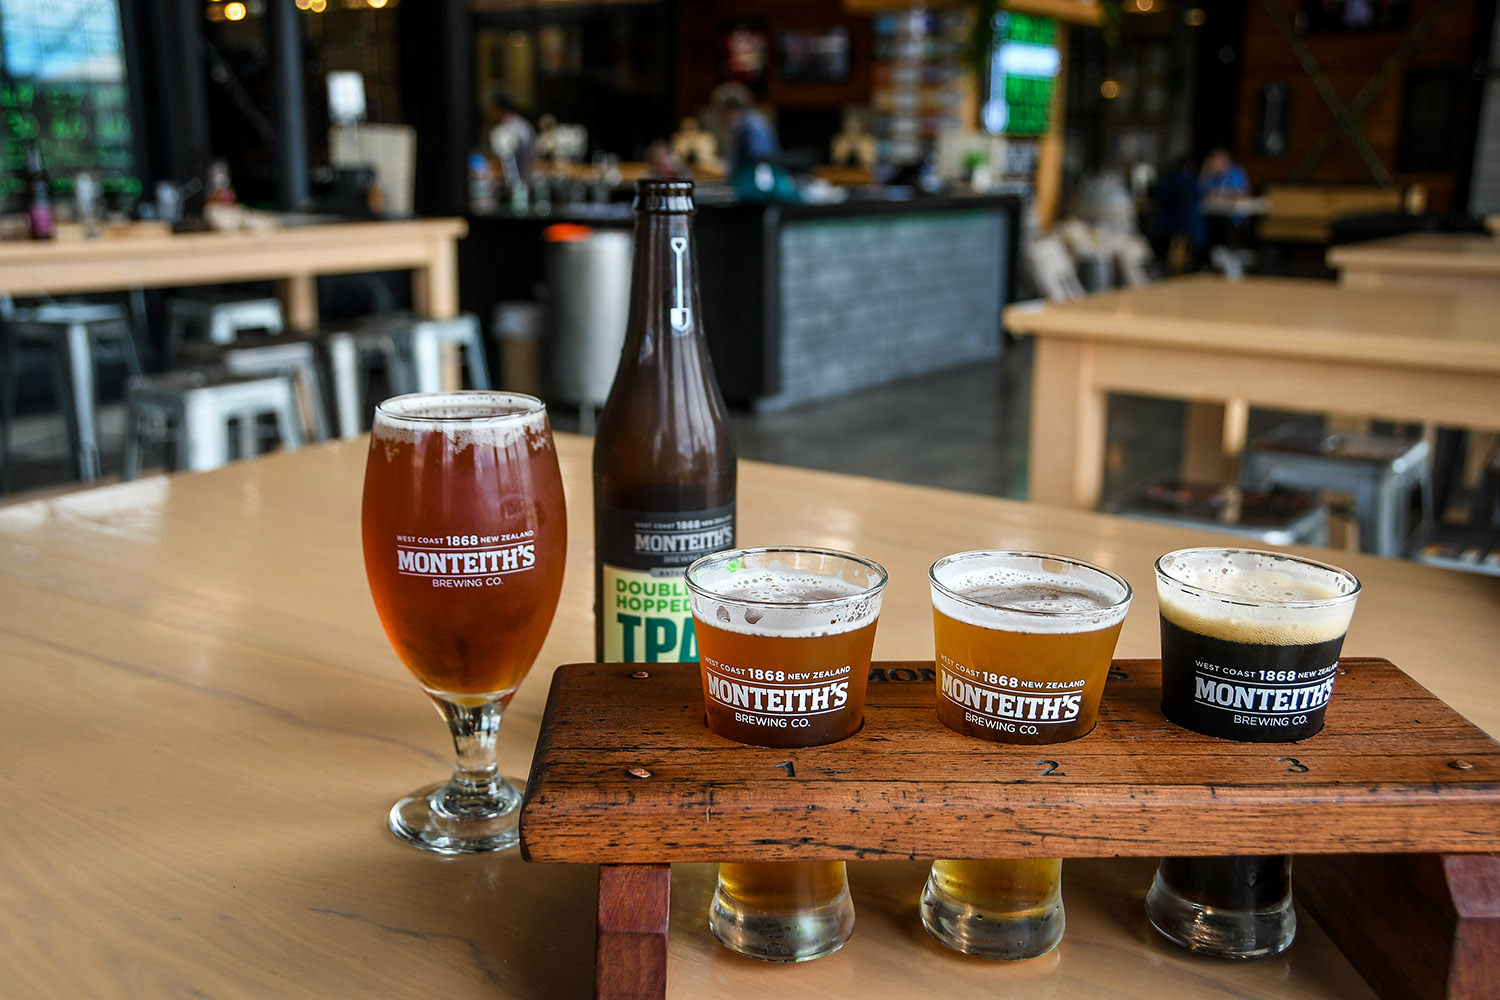 Things to Do in West Coast Monteith's Brewery